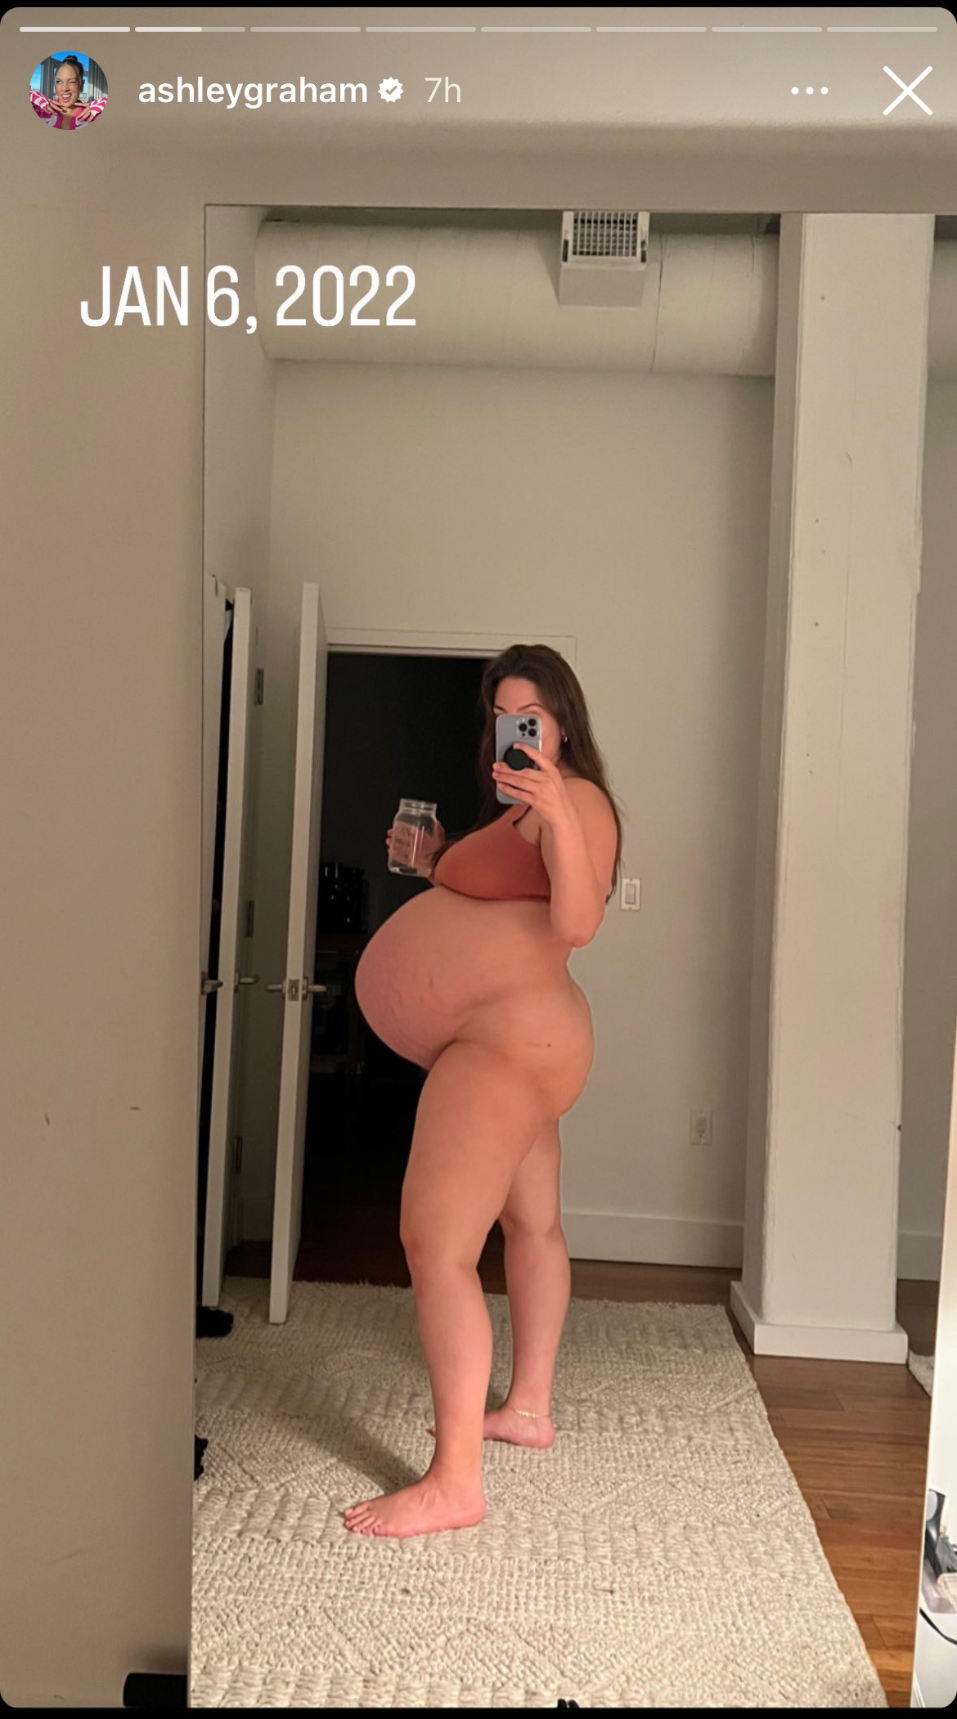 Ashley Graham looks unreal in totally naked pregnancy pics